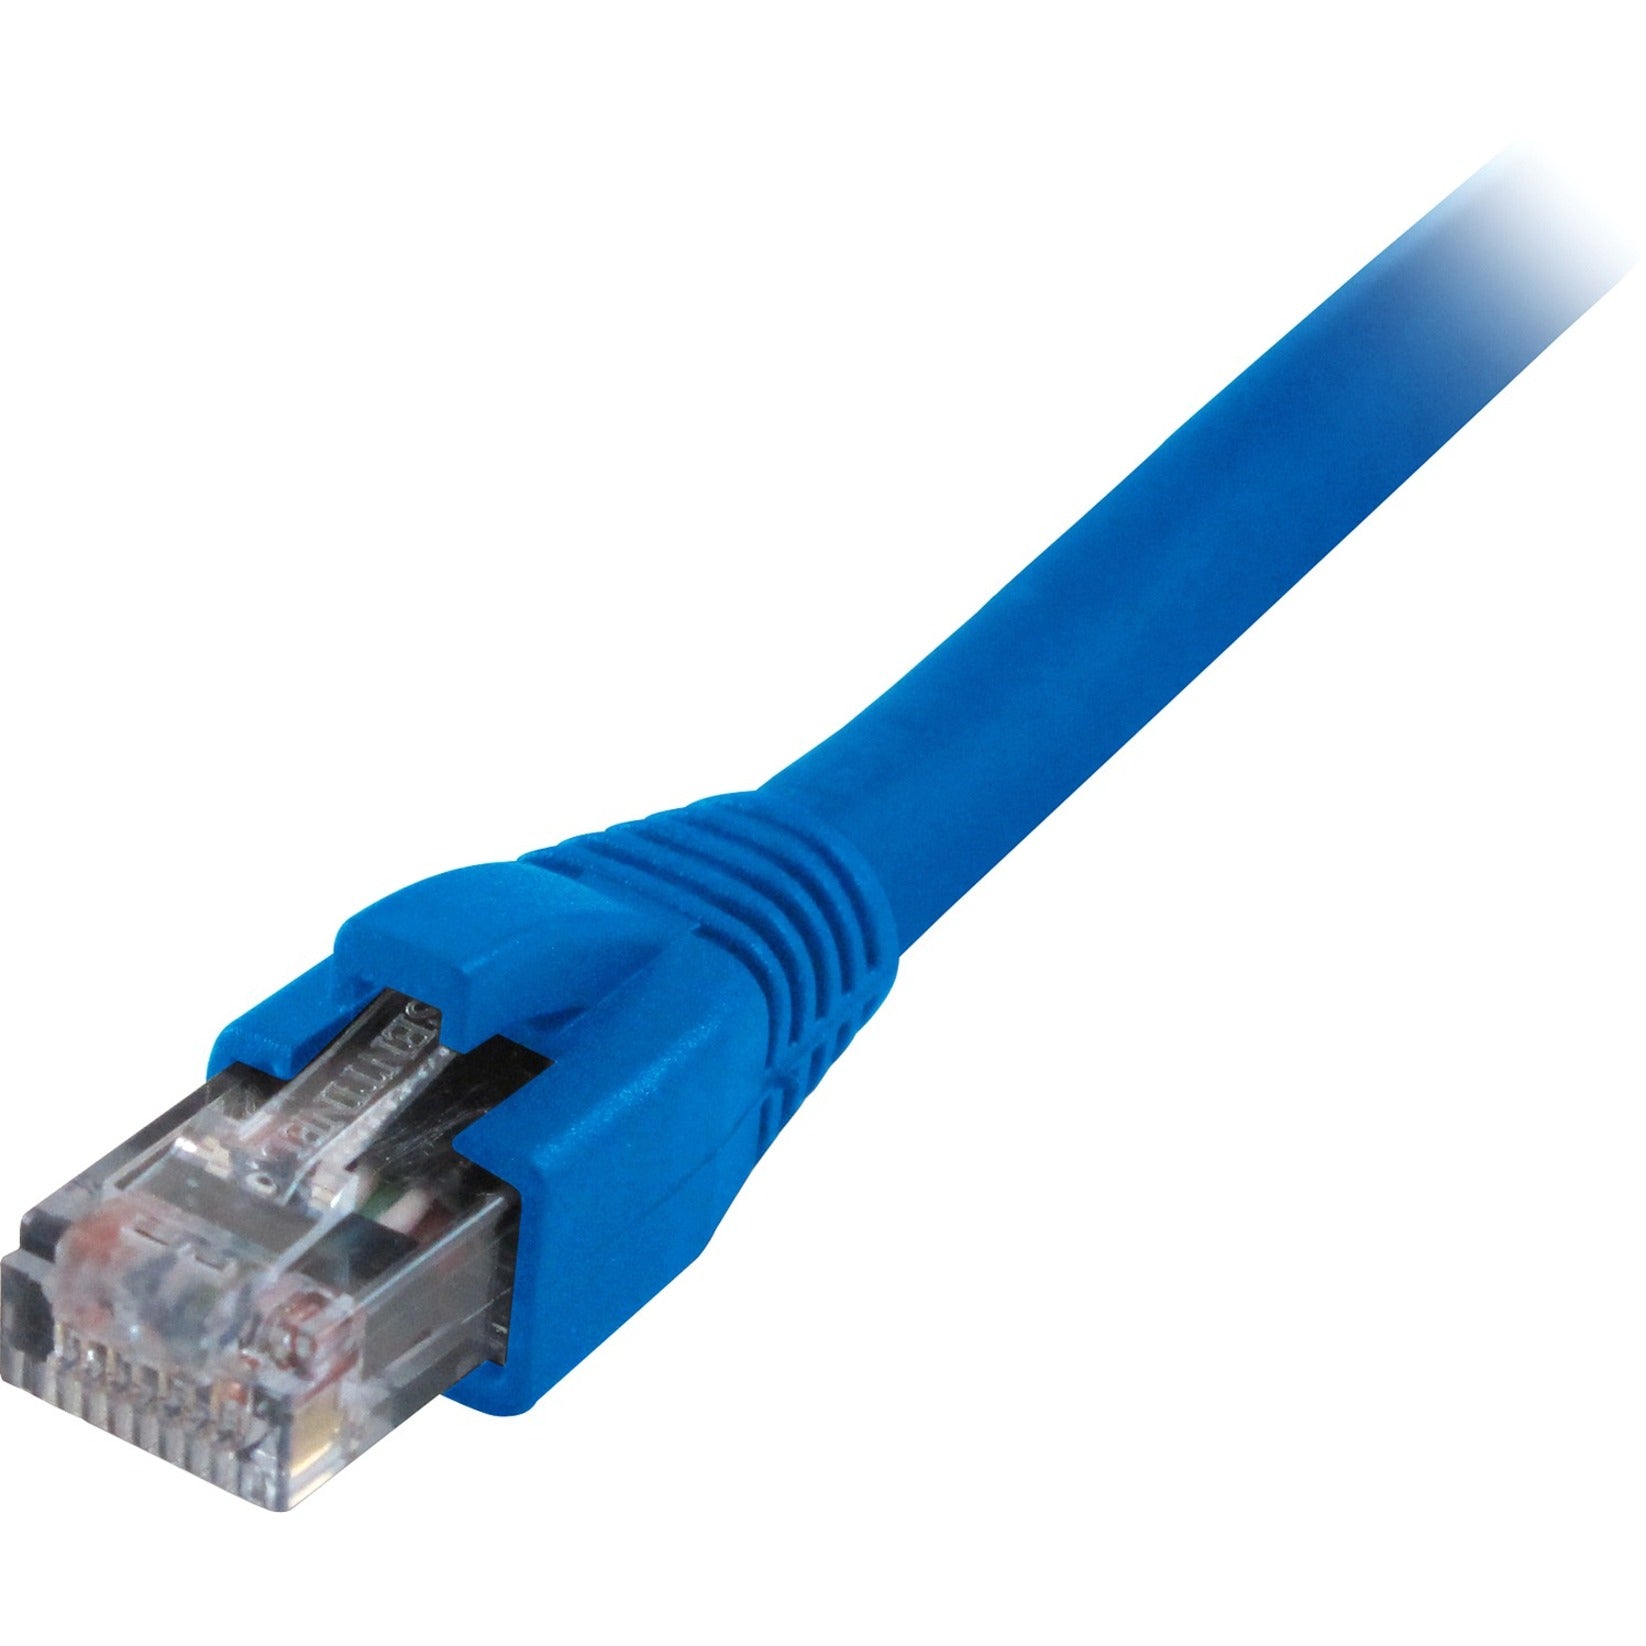 Comprehensive CAT5-350-3BLU Cat5e 350 Mhz Snagless Patch Cable 3ft Blue, Molded, Strain Relief, Stranded, Booted, 1 Gbit/s Data Transfer Rate